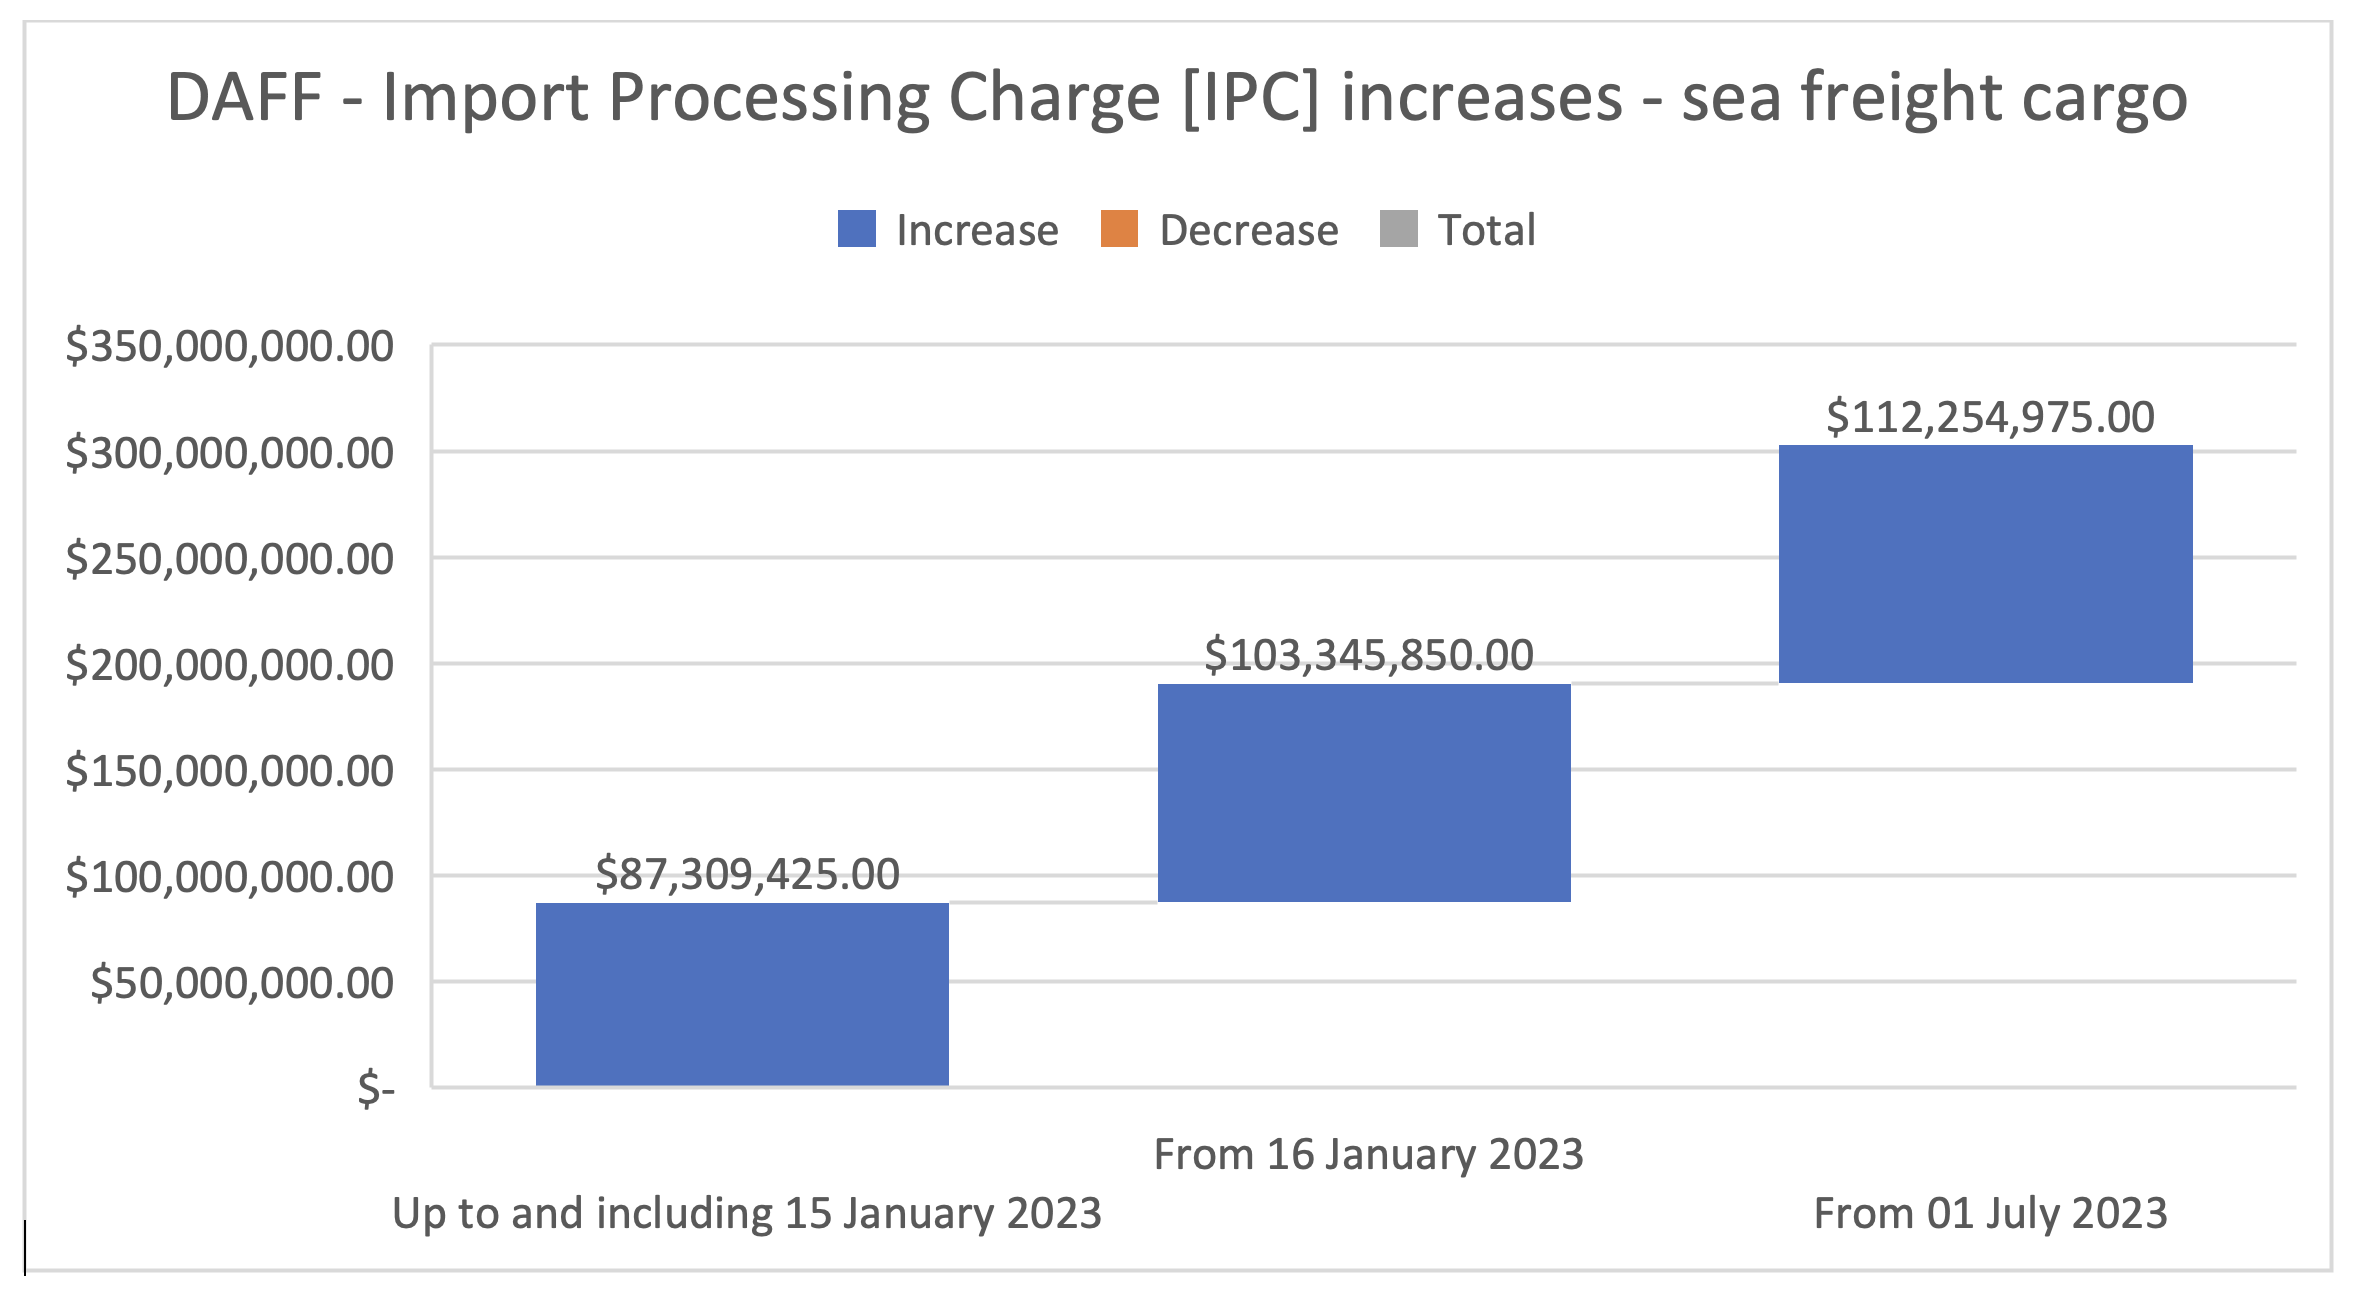 DAFF - Import Processing Charge [IPC] increases - sea freight cargo 
